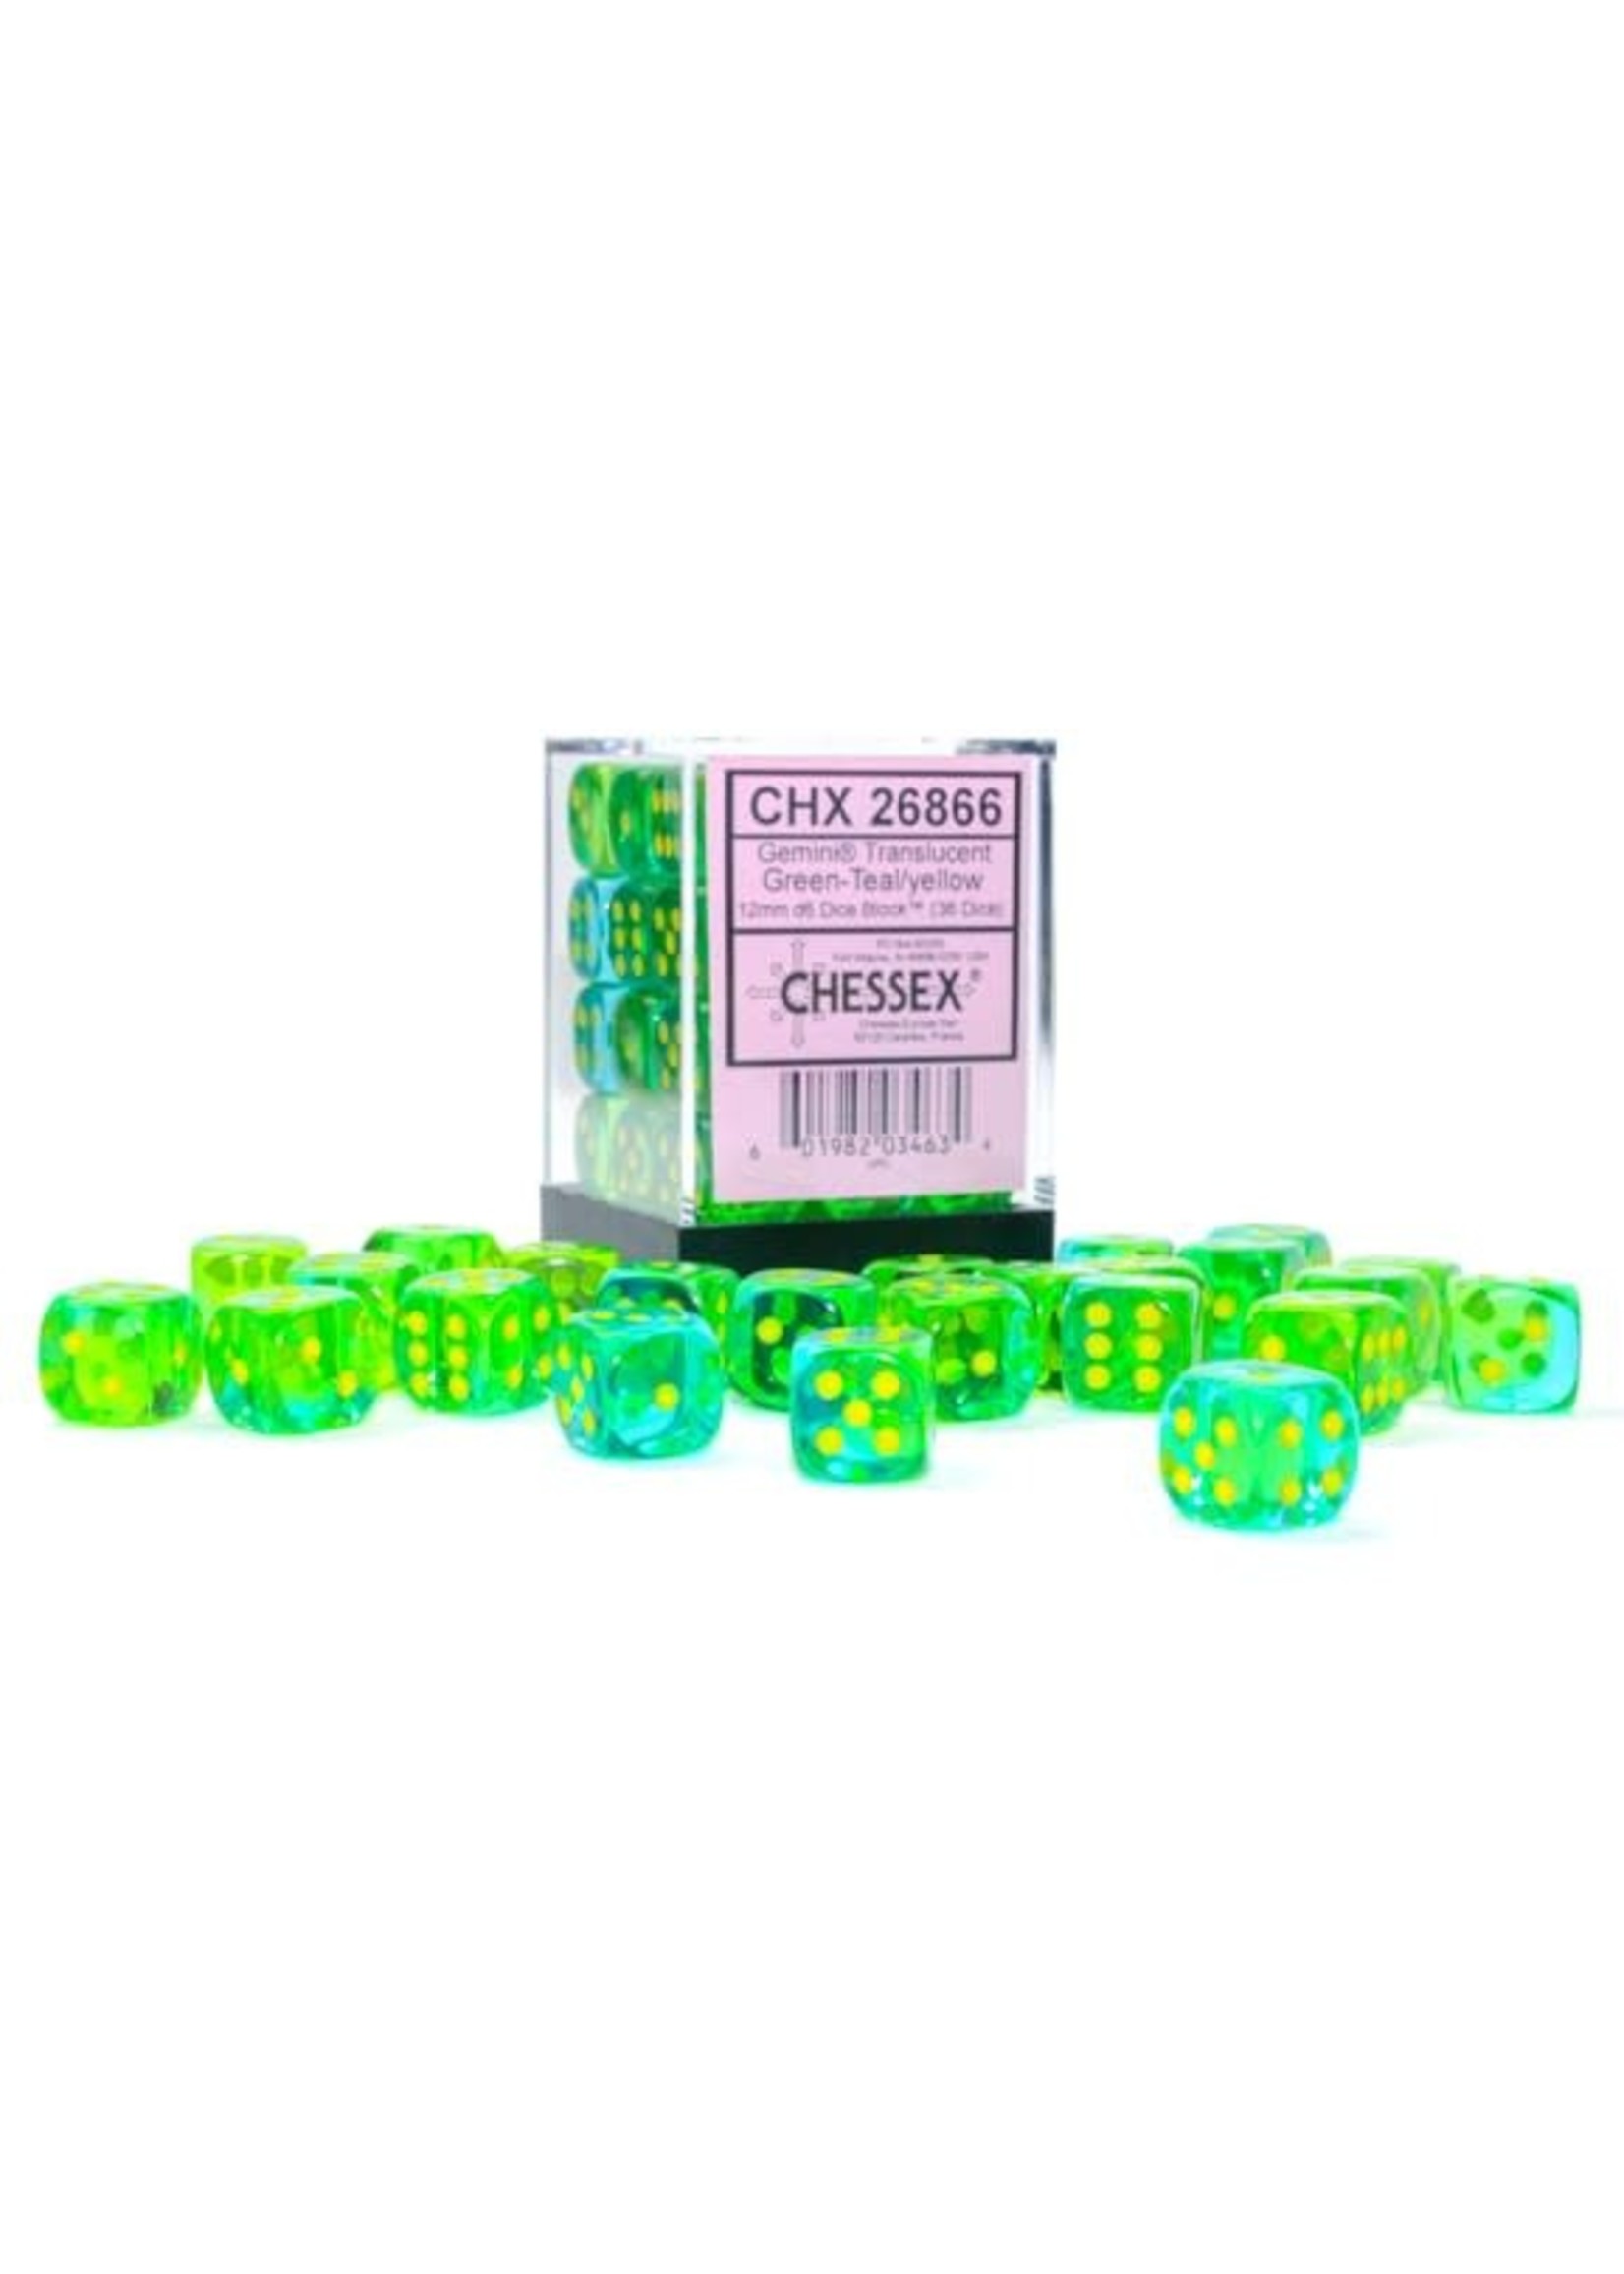 Chessex d6 Cube 12mm Gemini Translucent Green and Teal w/ yellow (36)